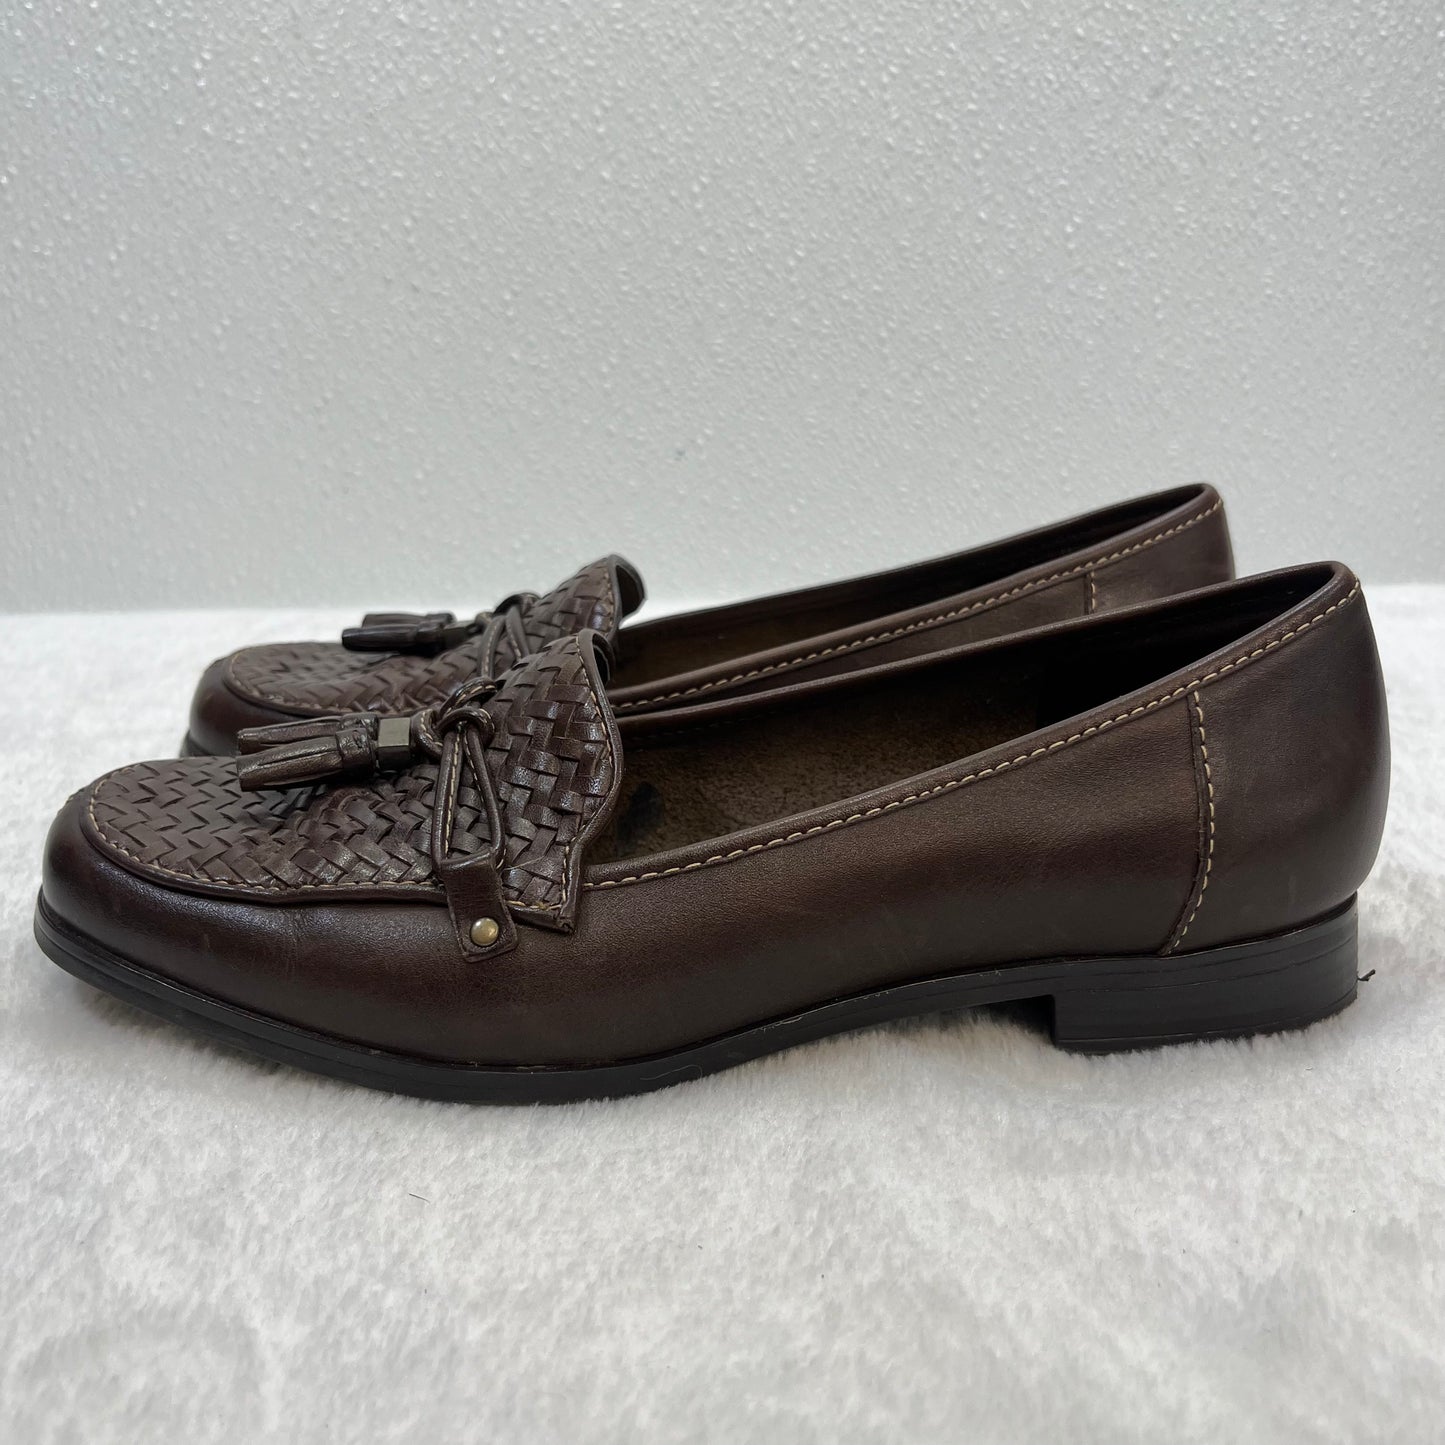 Shoes Flats Boat By Naturalizer  Size: 7.5